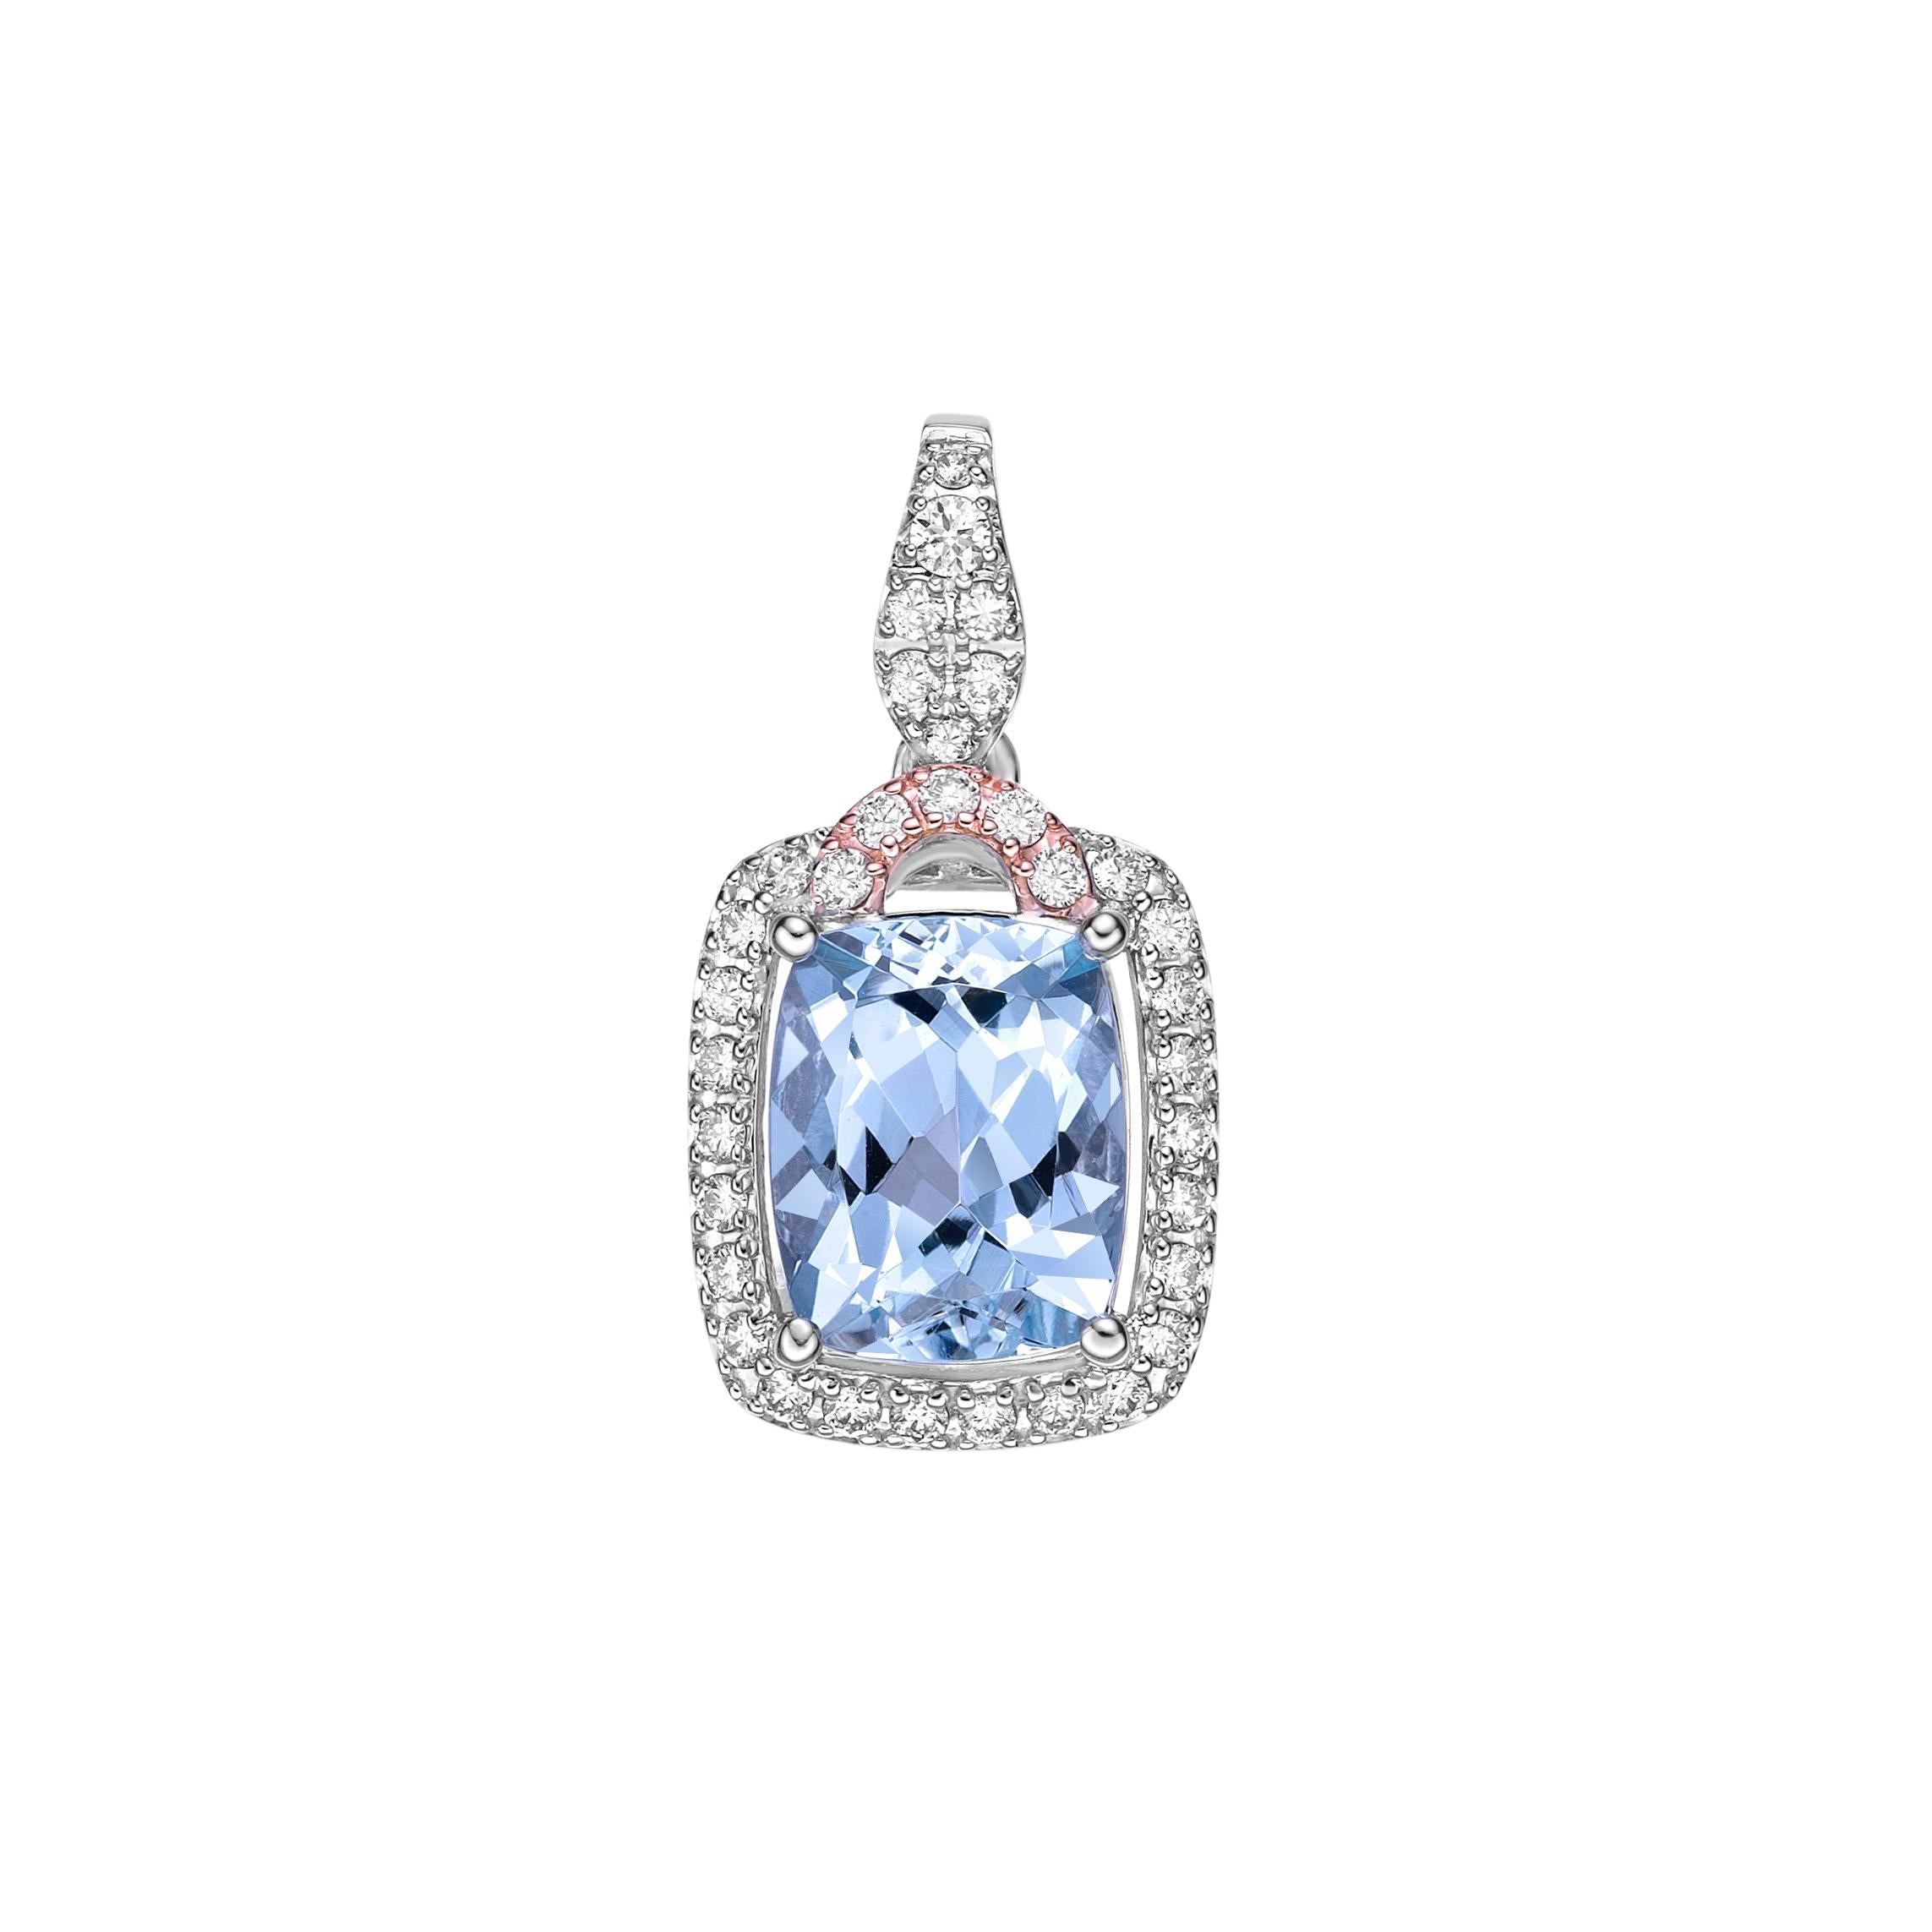 This collection features an array of Aquamarines with an icy blue hue that is as cool as it gets! Accented with Diamonds this pendant is made in white rose gold and present a classic yet elegant look.

Aquamarine Pendant in 18Karat White Rose Gold